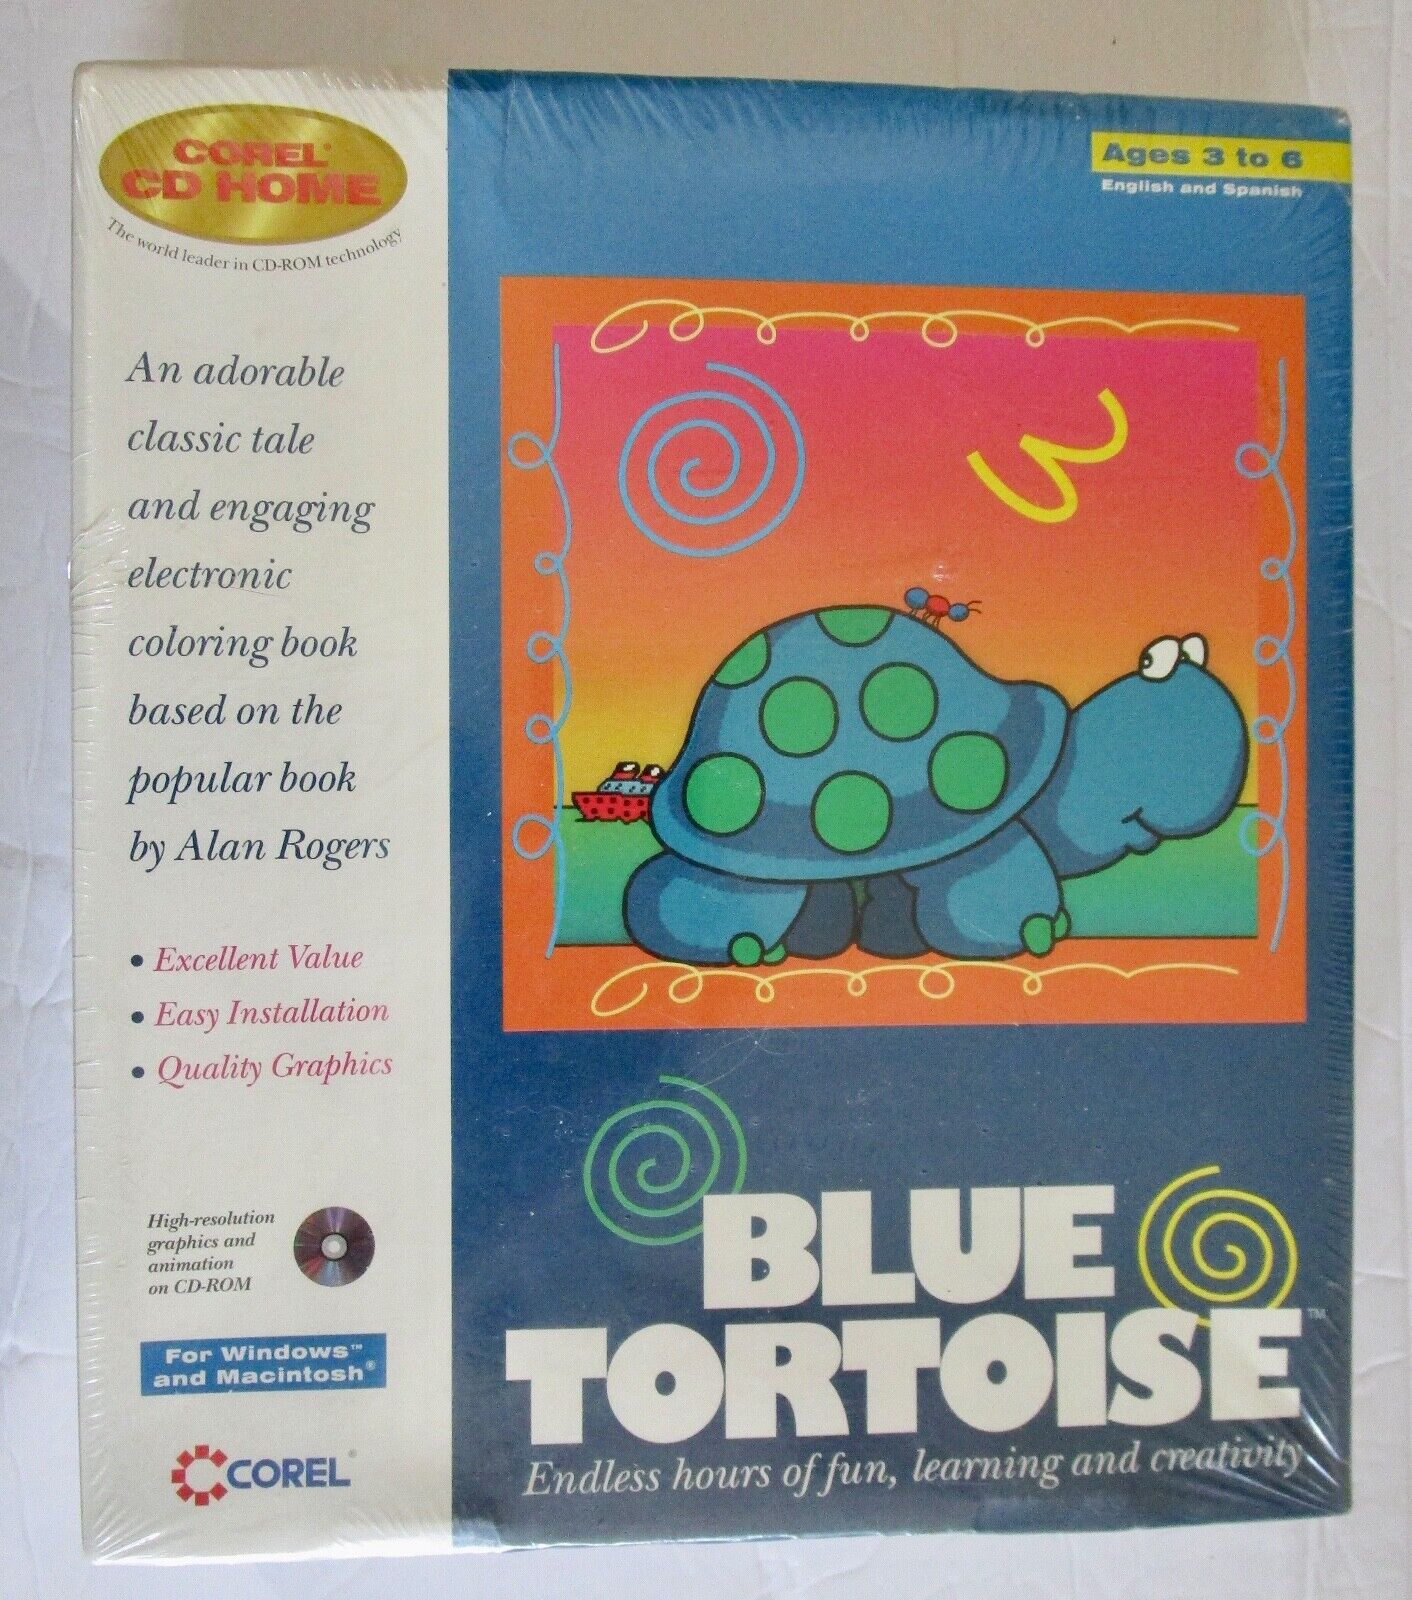 New Blue Tortoise Electronic Coloring Book Corel 1995 Big Box CD-ROM Ages 3 to 6